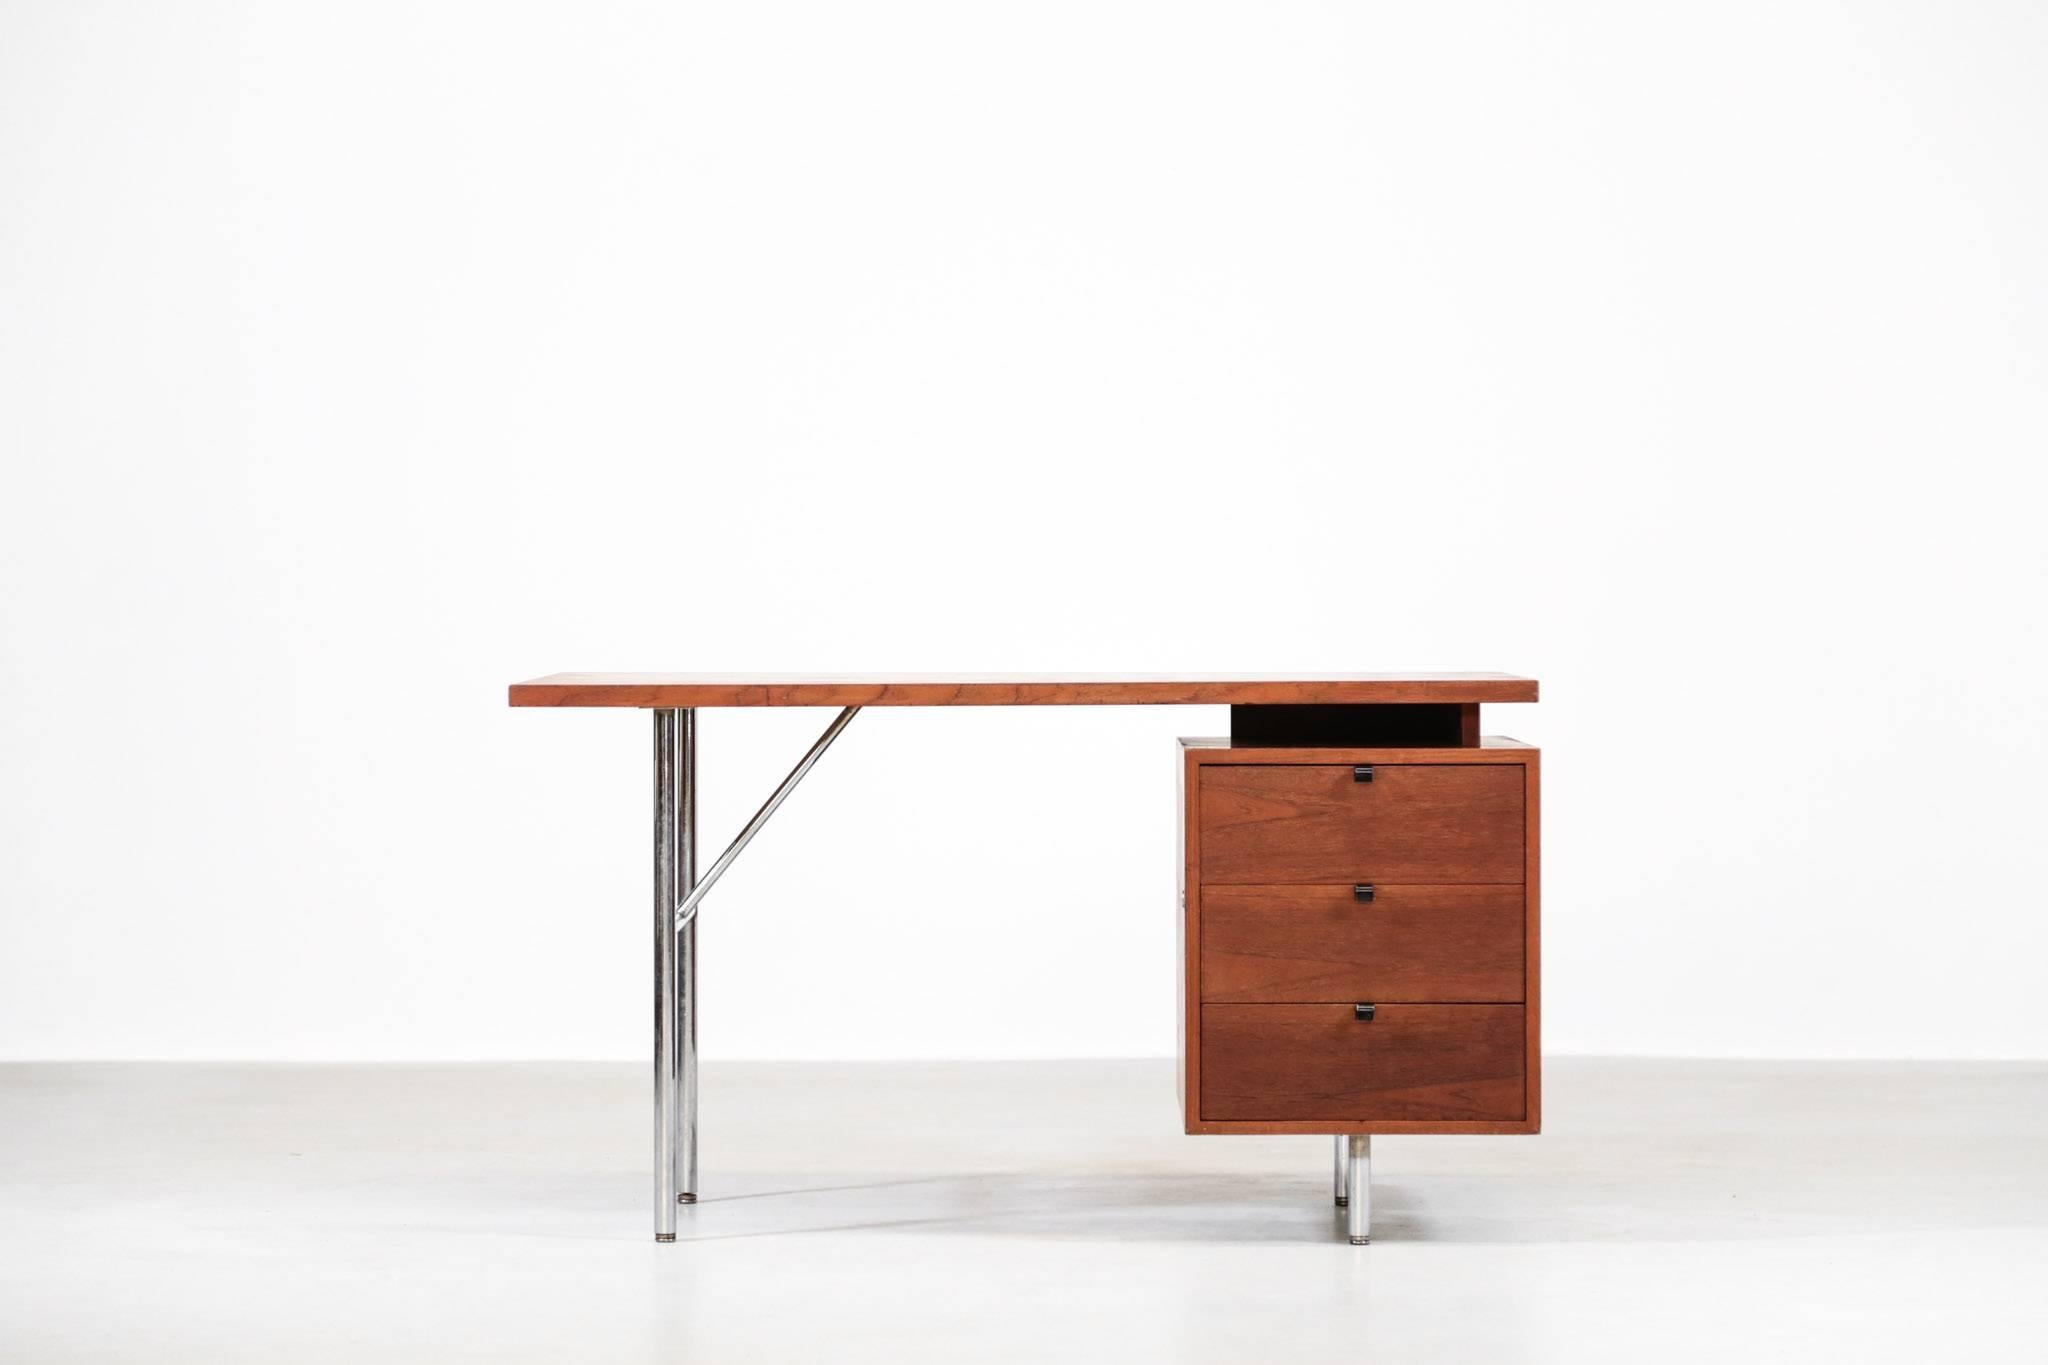 Really nice desk by George Nelson for Herman Miller.
Made of steel and walnut.
Great patina.